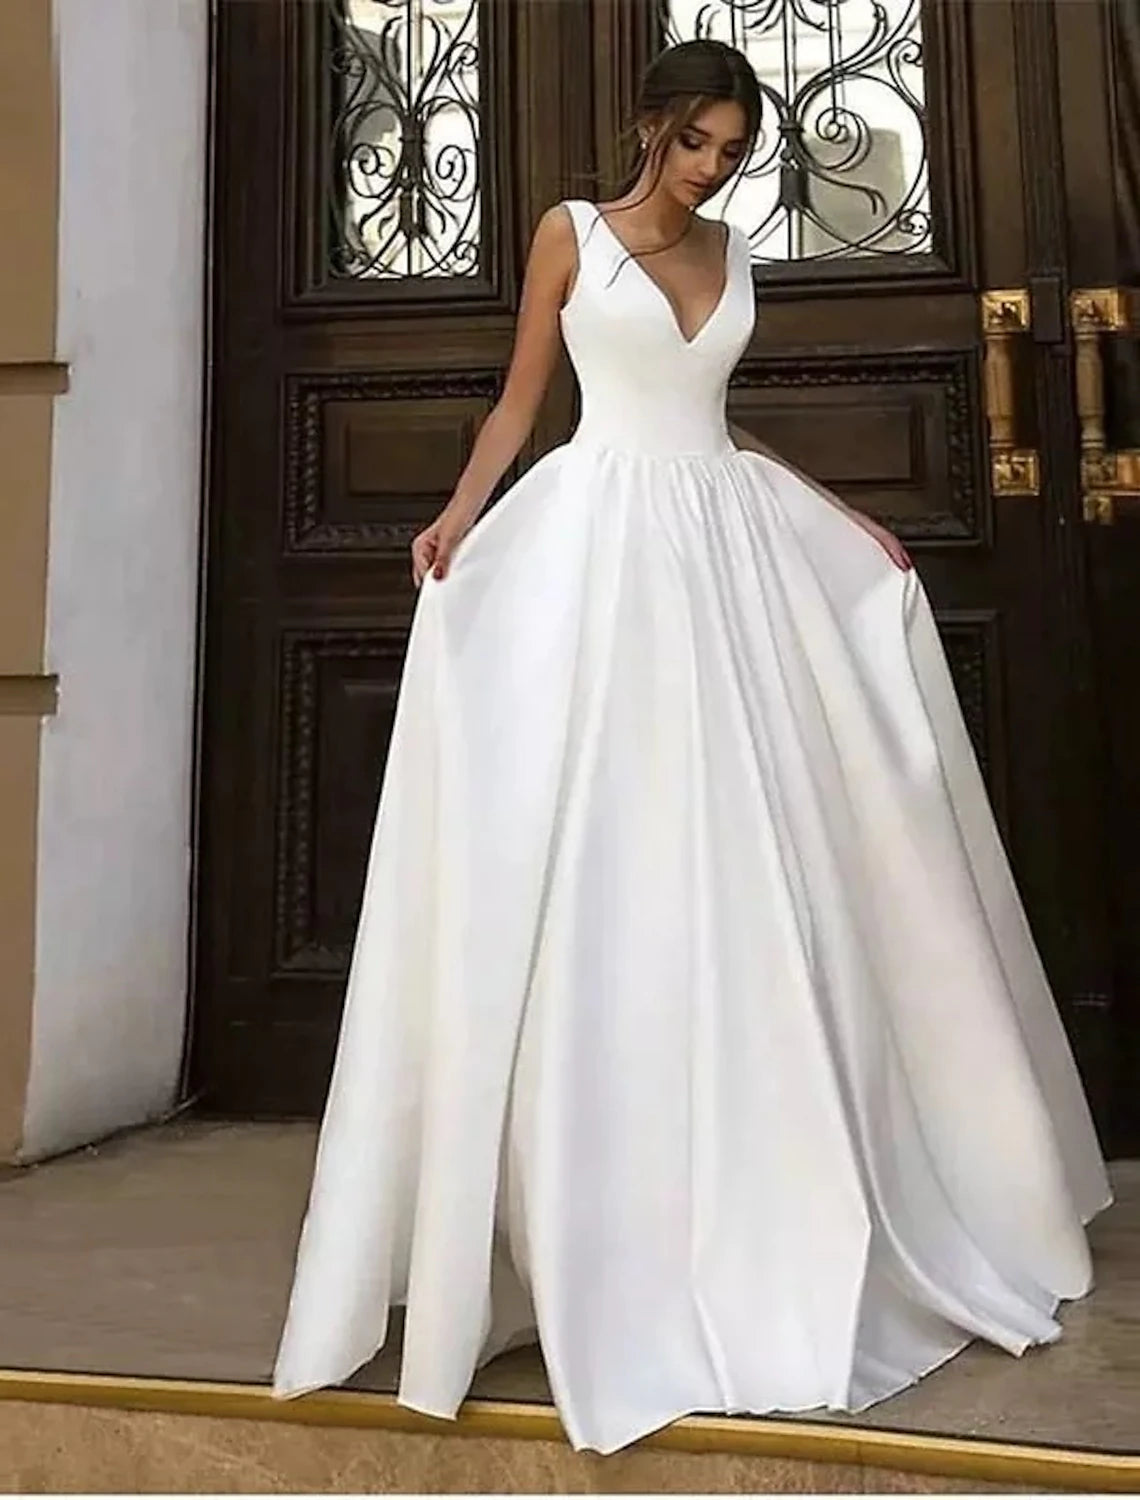 Reception Casual Formal Wedding Dresses A-Line V Neck Sleeveless Floor Length Satin Bridal Gowns With Pleats Solid Color Summer Fall Wedding Party